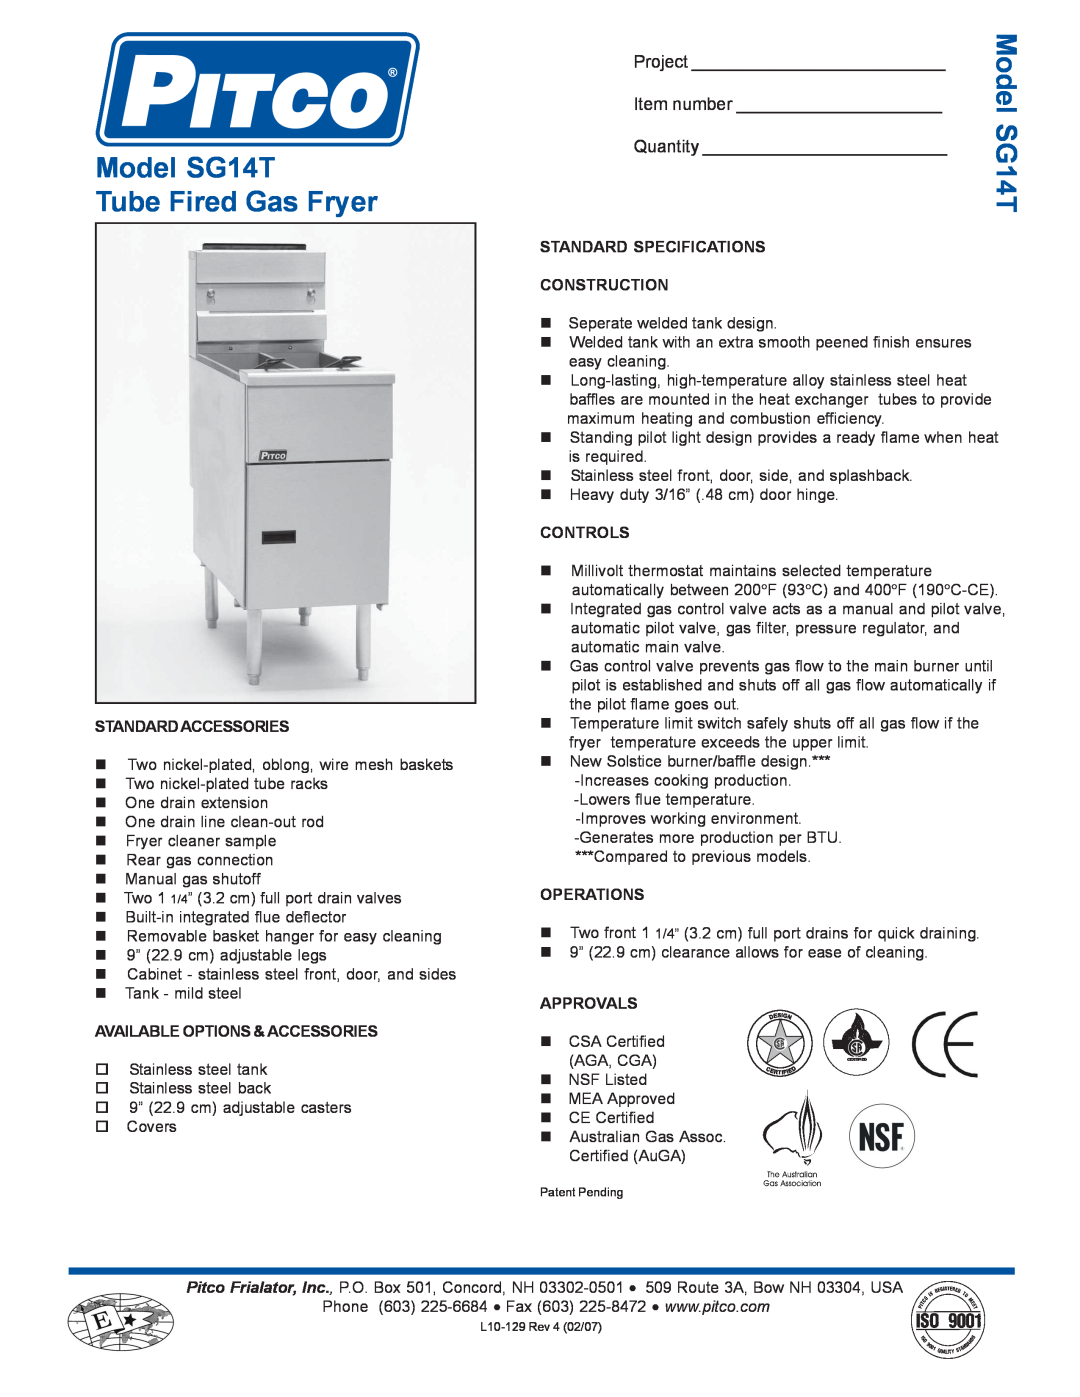 Pitco Frialator specifications Model SG14T Tube Fired Gas Fryer, Project, Item number, Quantity, Standardaccessories 